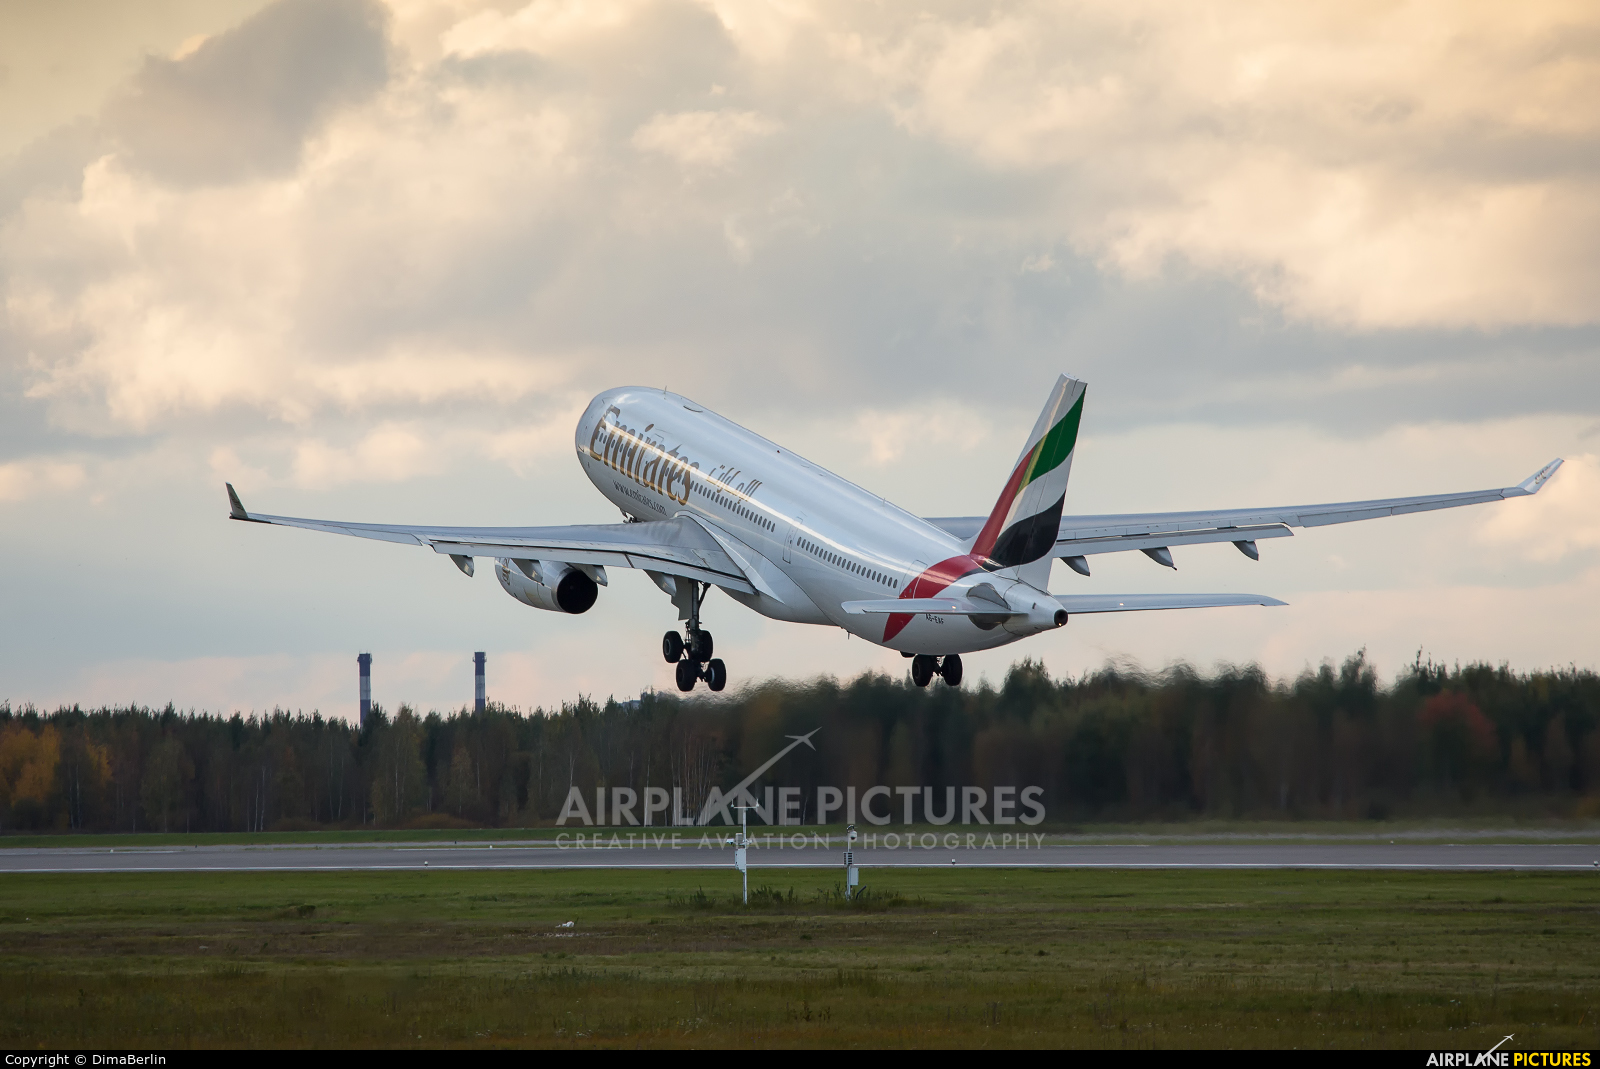 Emirates Airlines A6-EAF aircraft at St. Petersburg - Pulkovo